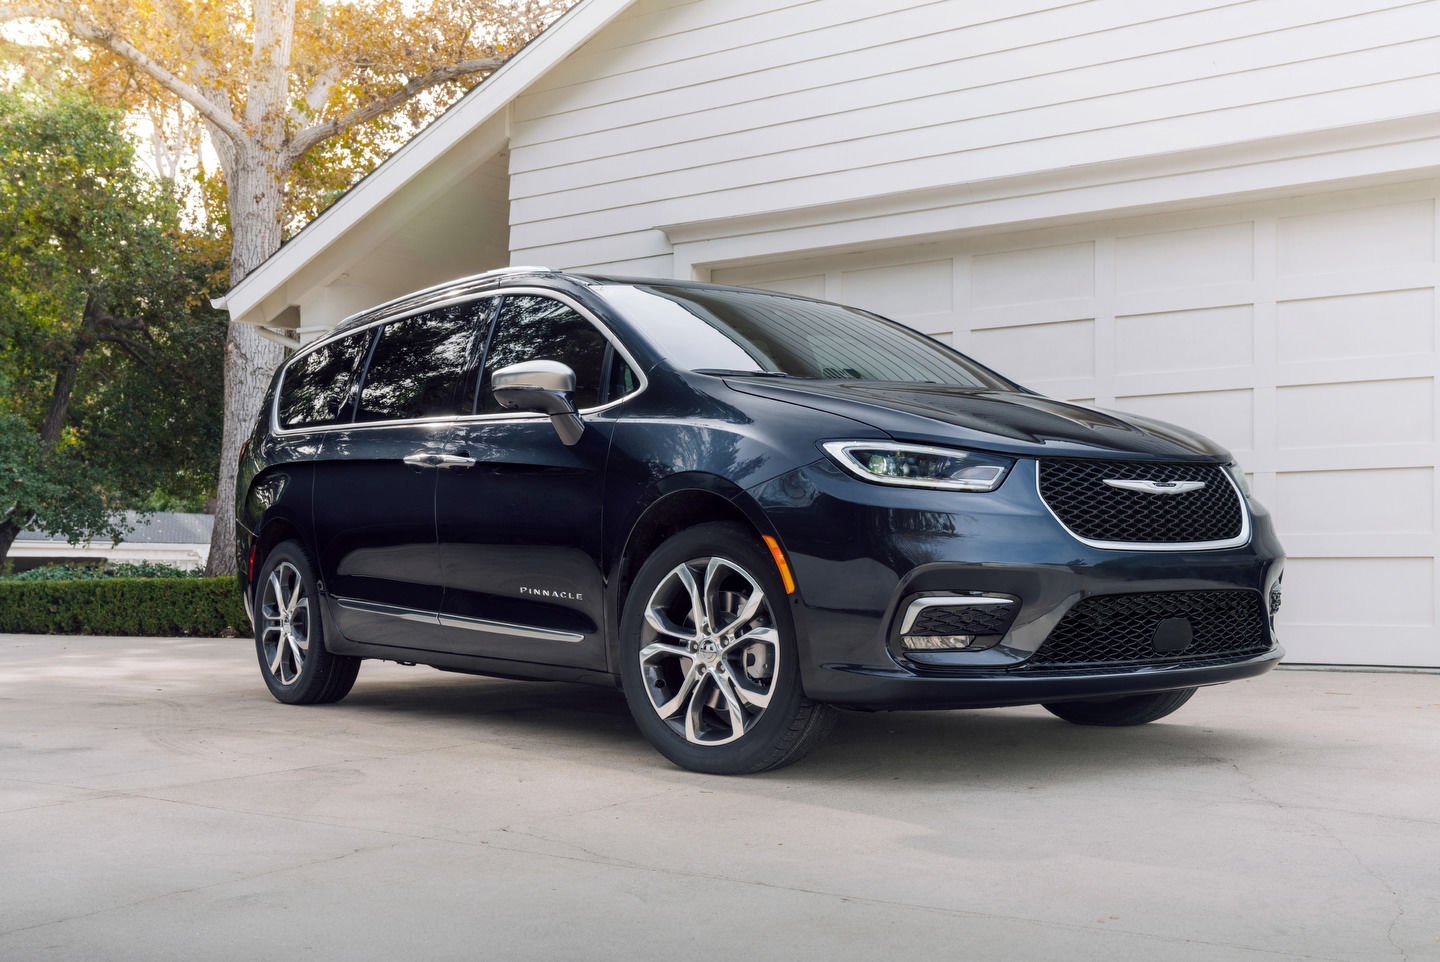 2022 Chrysler Pacifica : The perfect summer vacation vehicle